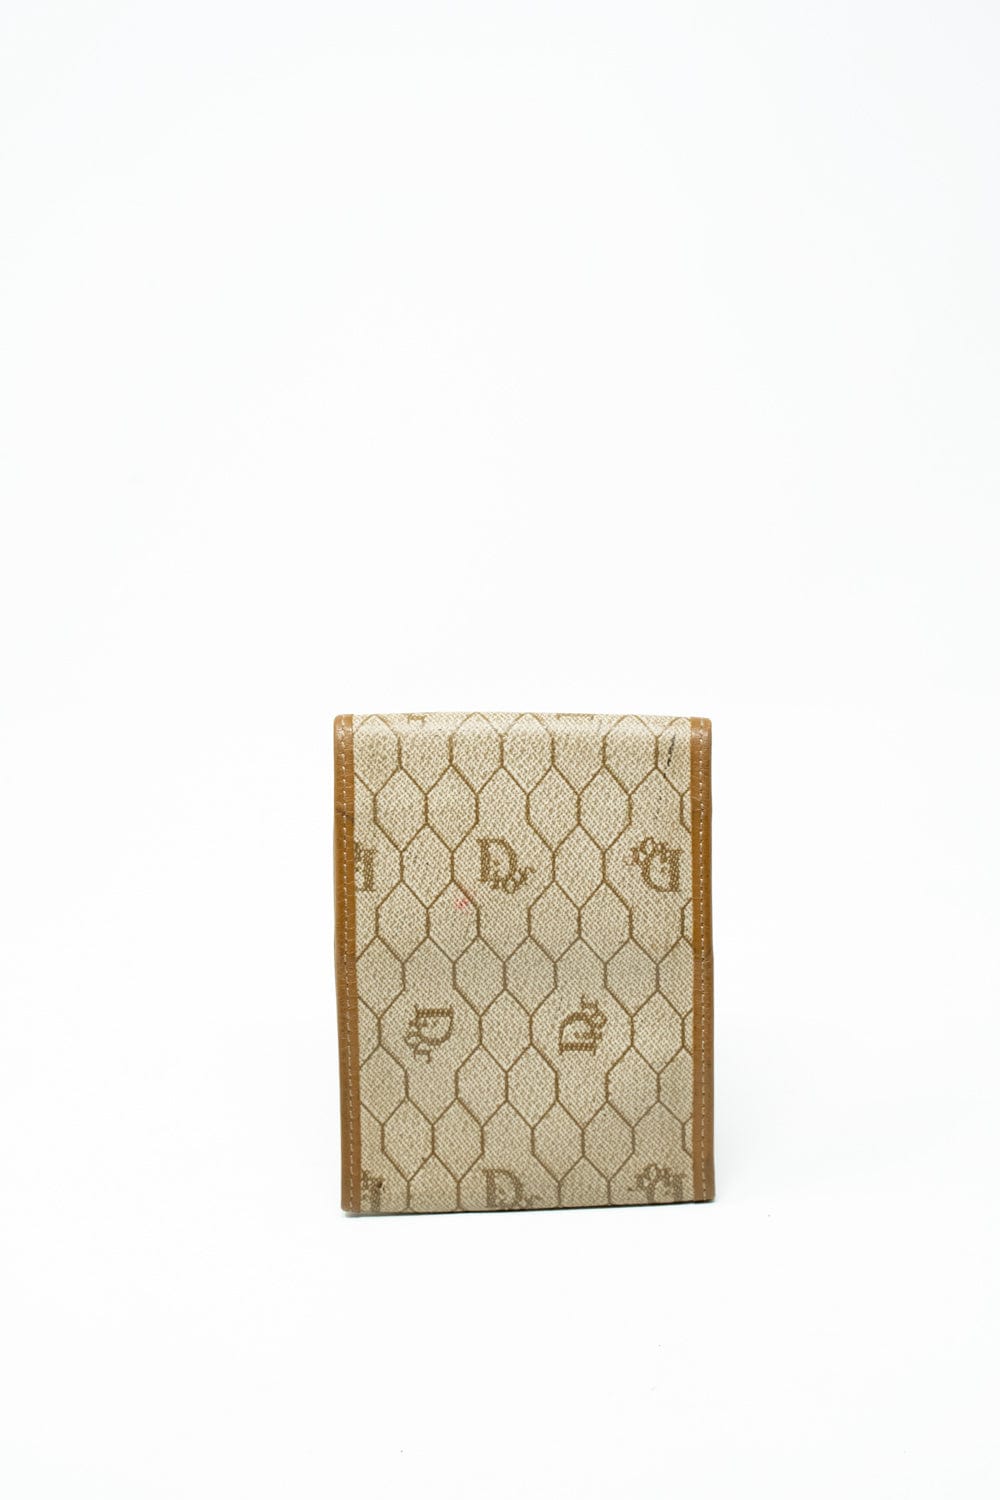 Christian Dior Dior Vintage Honeycomb coated canvas wallet cover - AEL1014